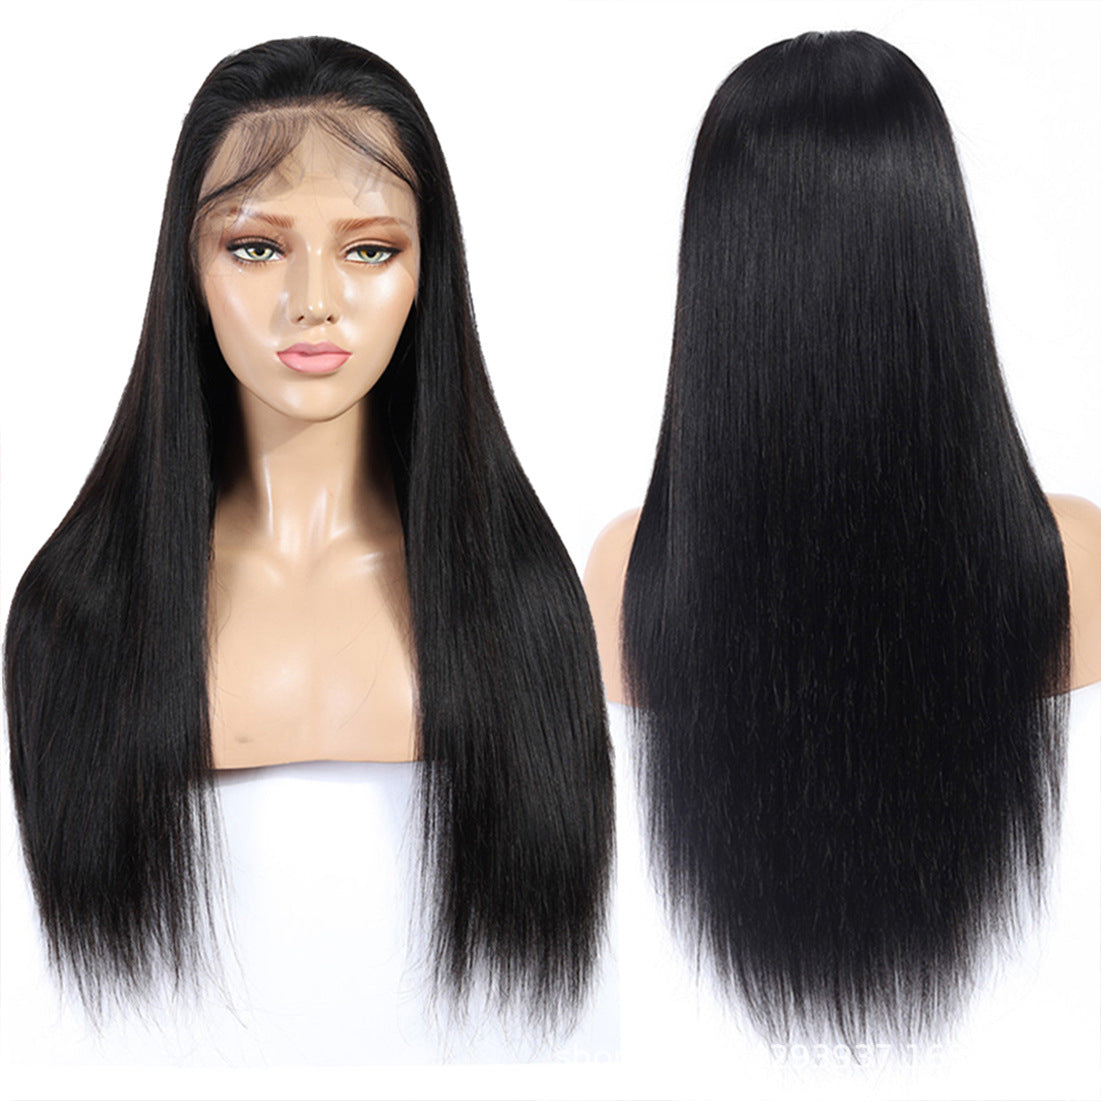 Rulercosplay Long Black Straight Wig Real Human Hair for Women